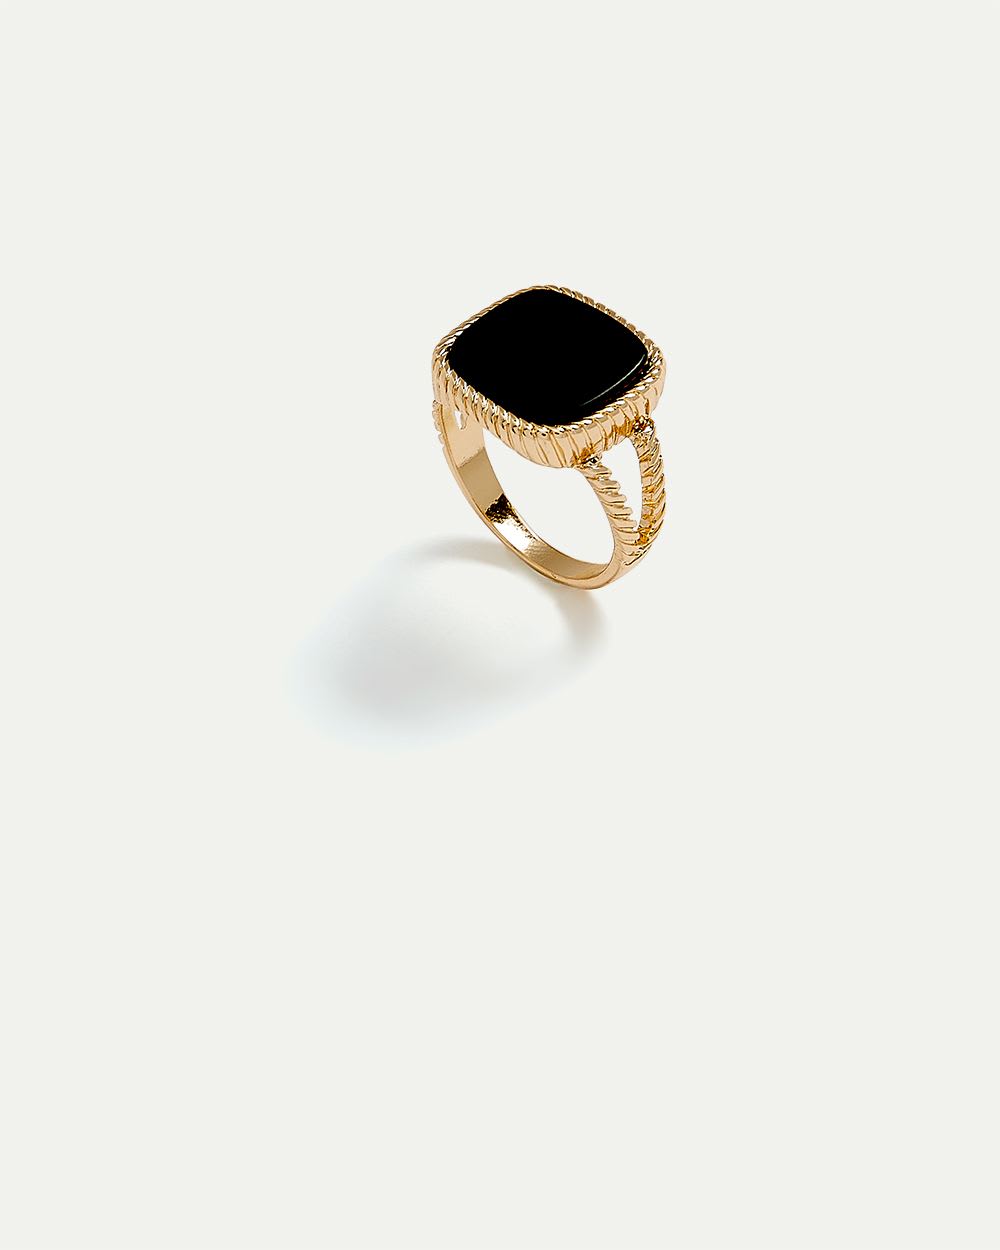 Vintage Ring with Black Stone